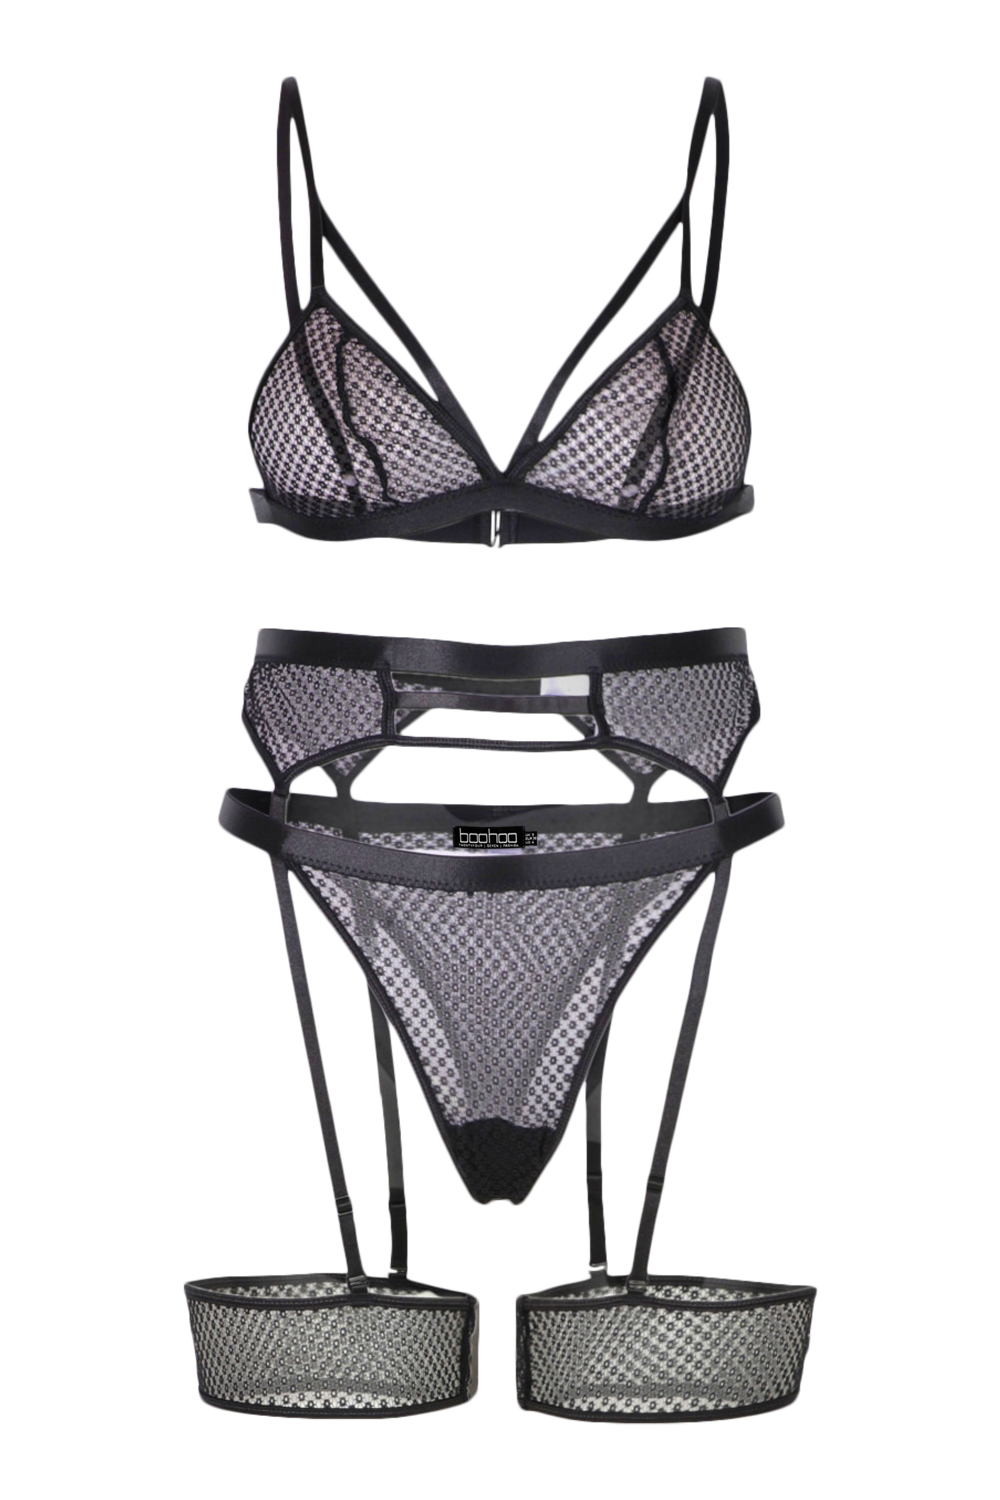 Plus 3 Piece Strapping Lingerie Set